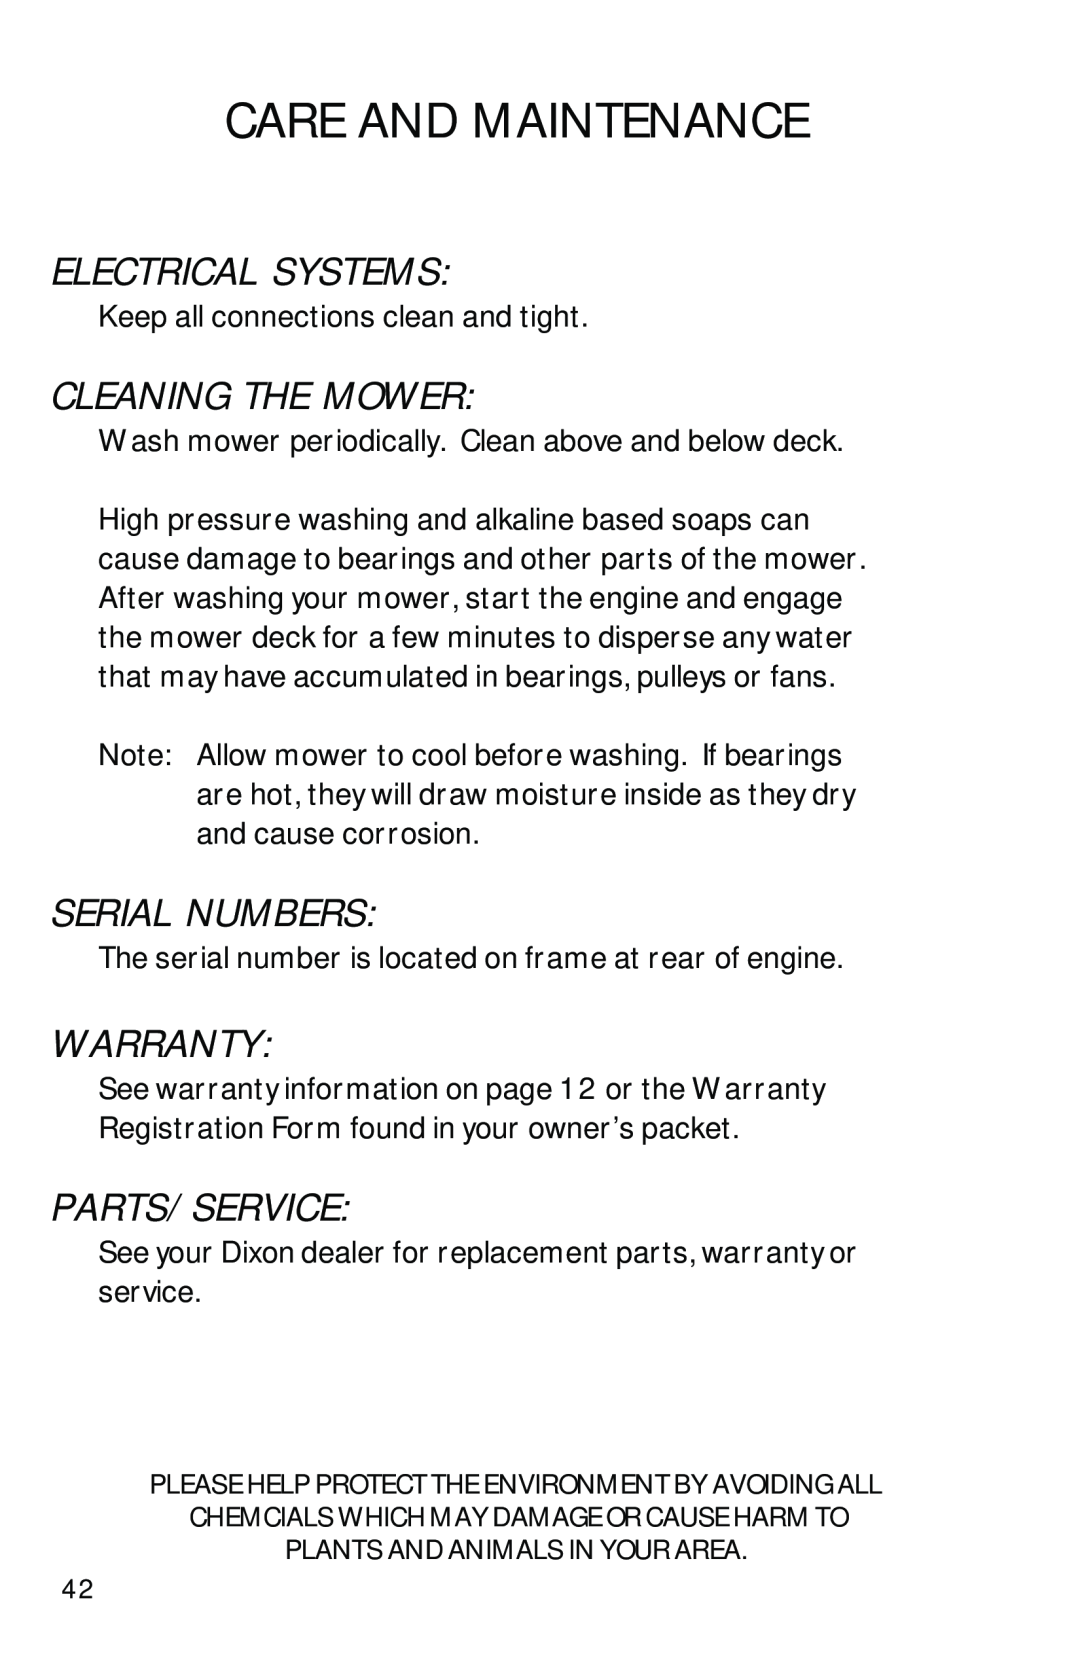 Dixon 1950-2300 Series manual Electrical Systems, Cleaning The Mower, Serial Numbers, Warranty, Parts/Service 